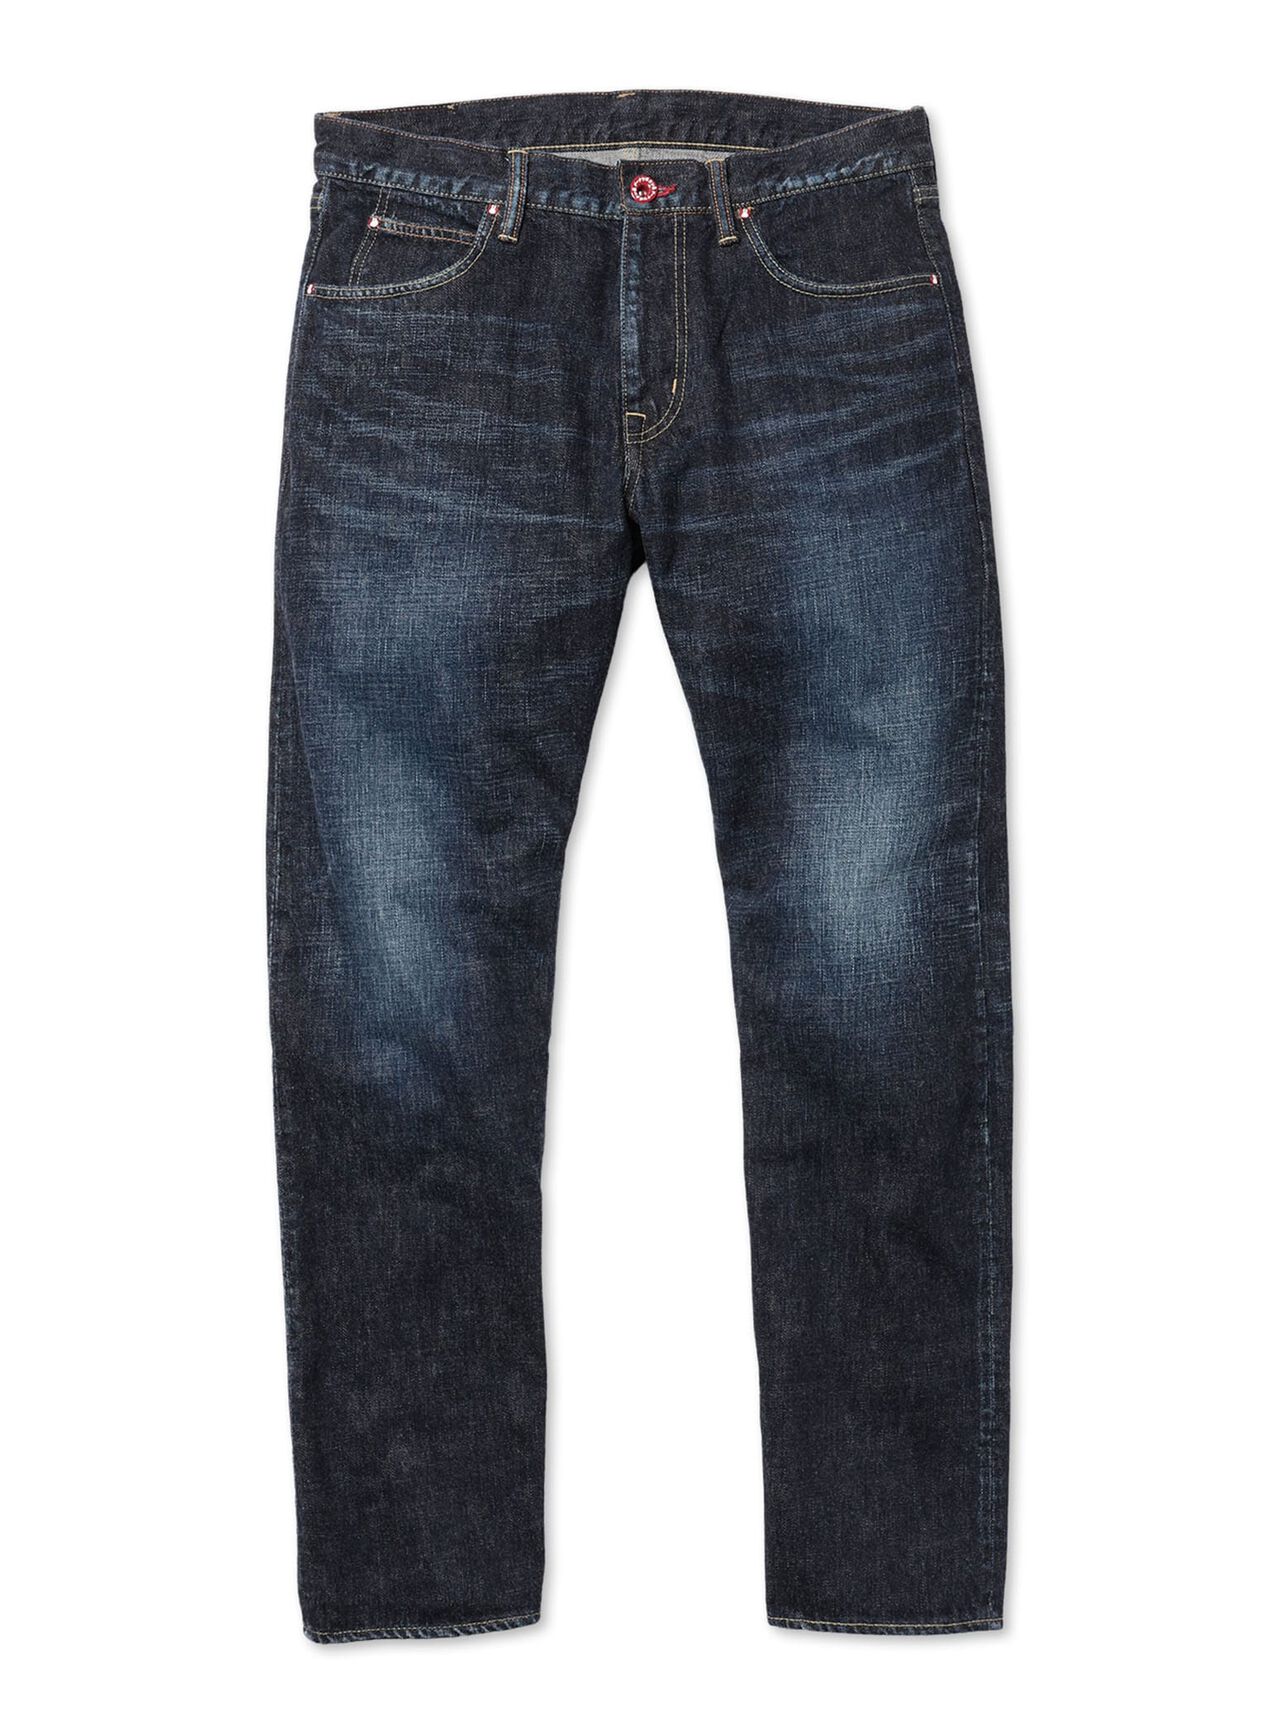 Jeans - Ordinary 22-U2 1 year,, large image number 0